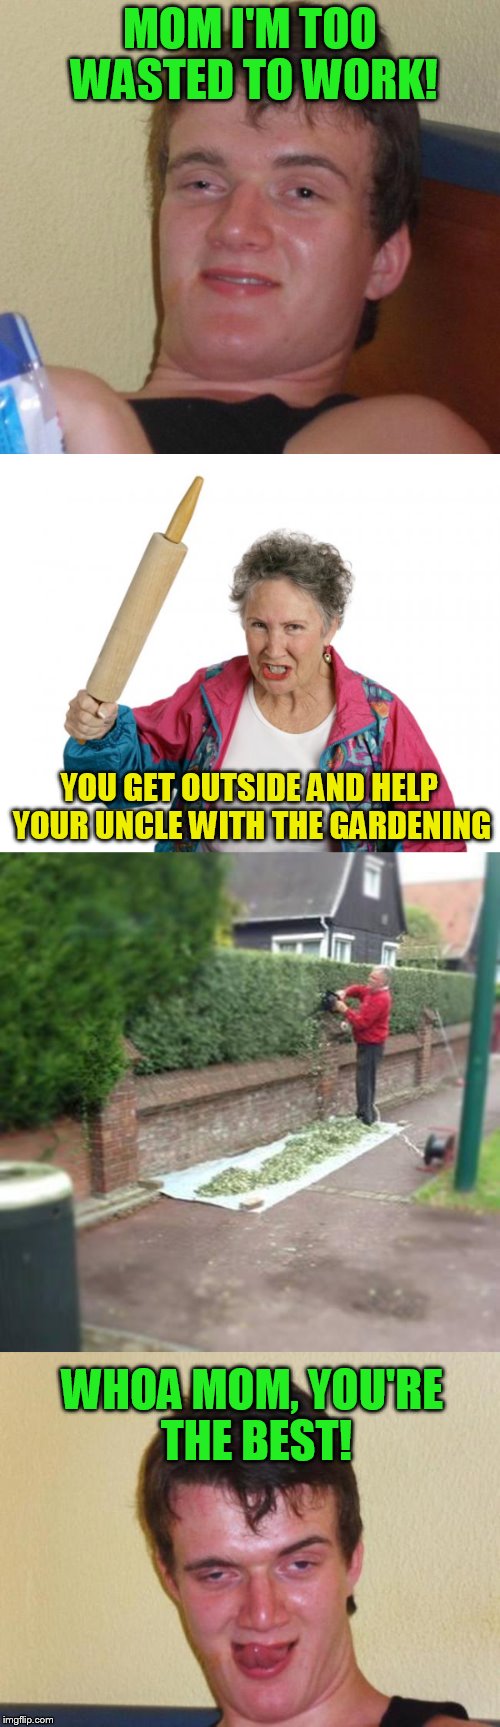 10 guy gets a job! | MOM I'M TOO WASTED TO WORK! YOU GET OUTSIDE AND HELP YOUR UNCLE WITH THE GARDENING; WHOA MOM, YOU'RE THE BEST! | image tagged in 10 guy,job,wasted,mom,funny meme,gardening | made w/ Imgflip meme maker